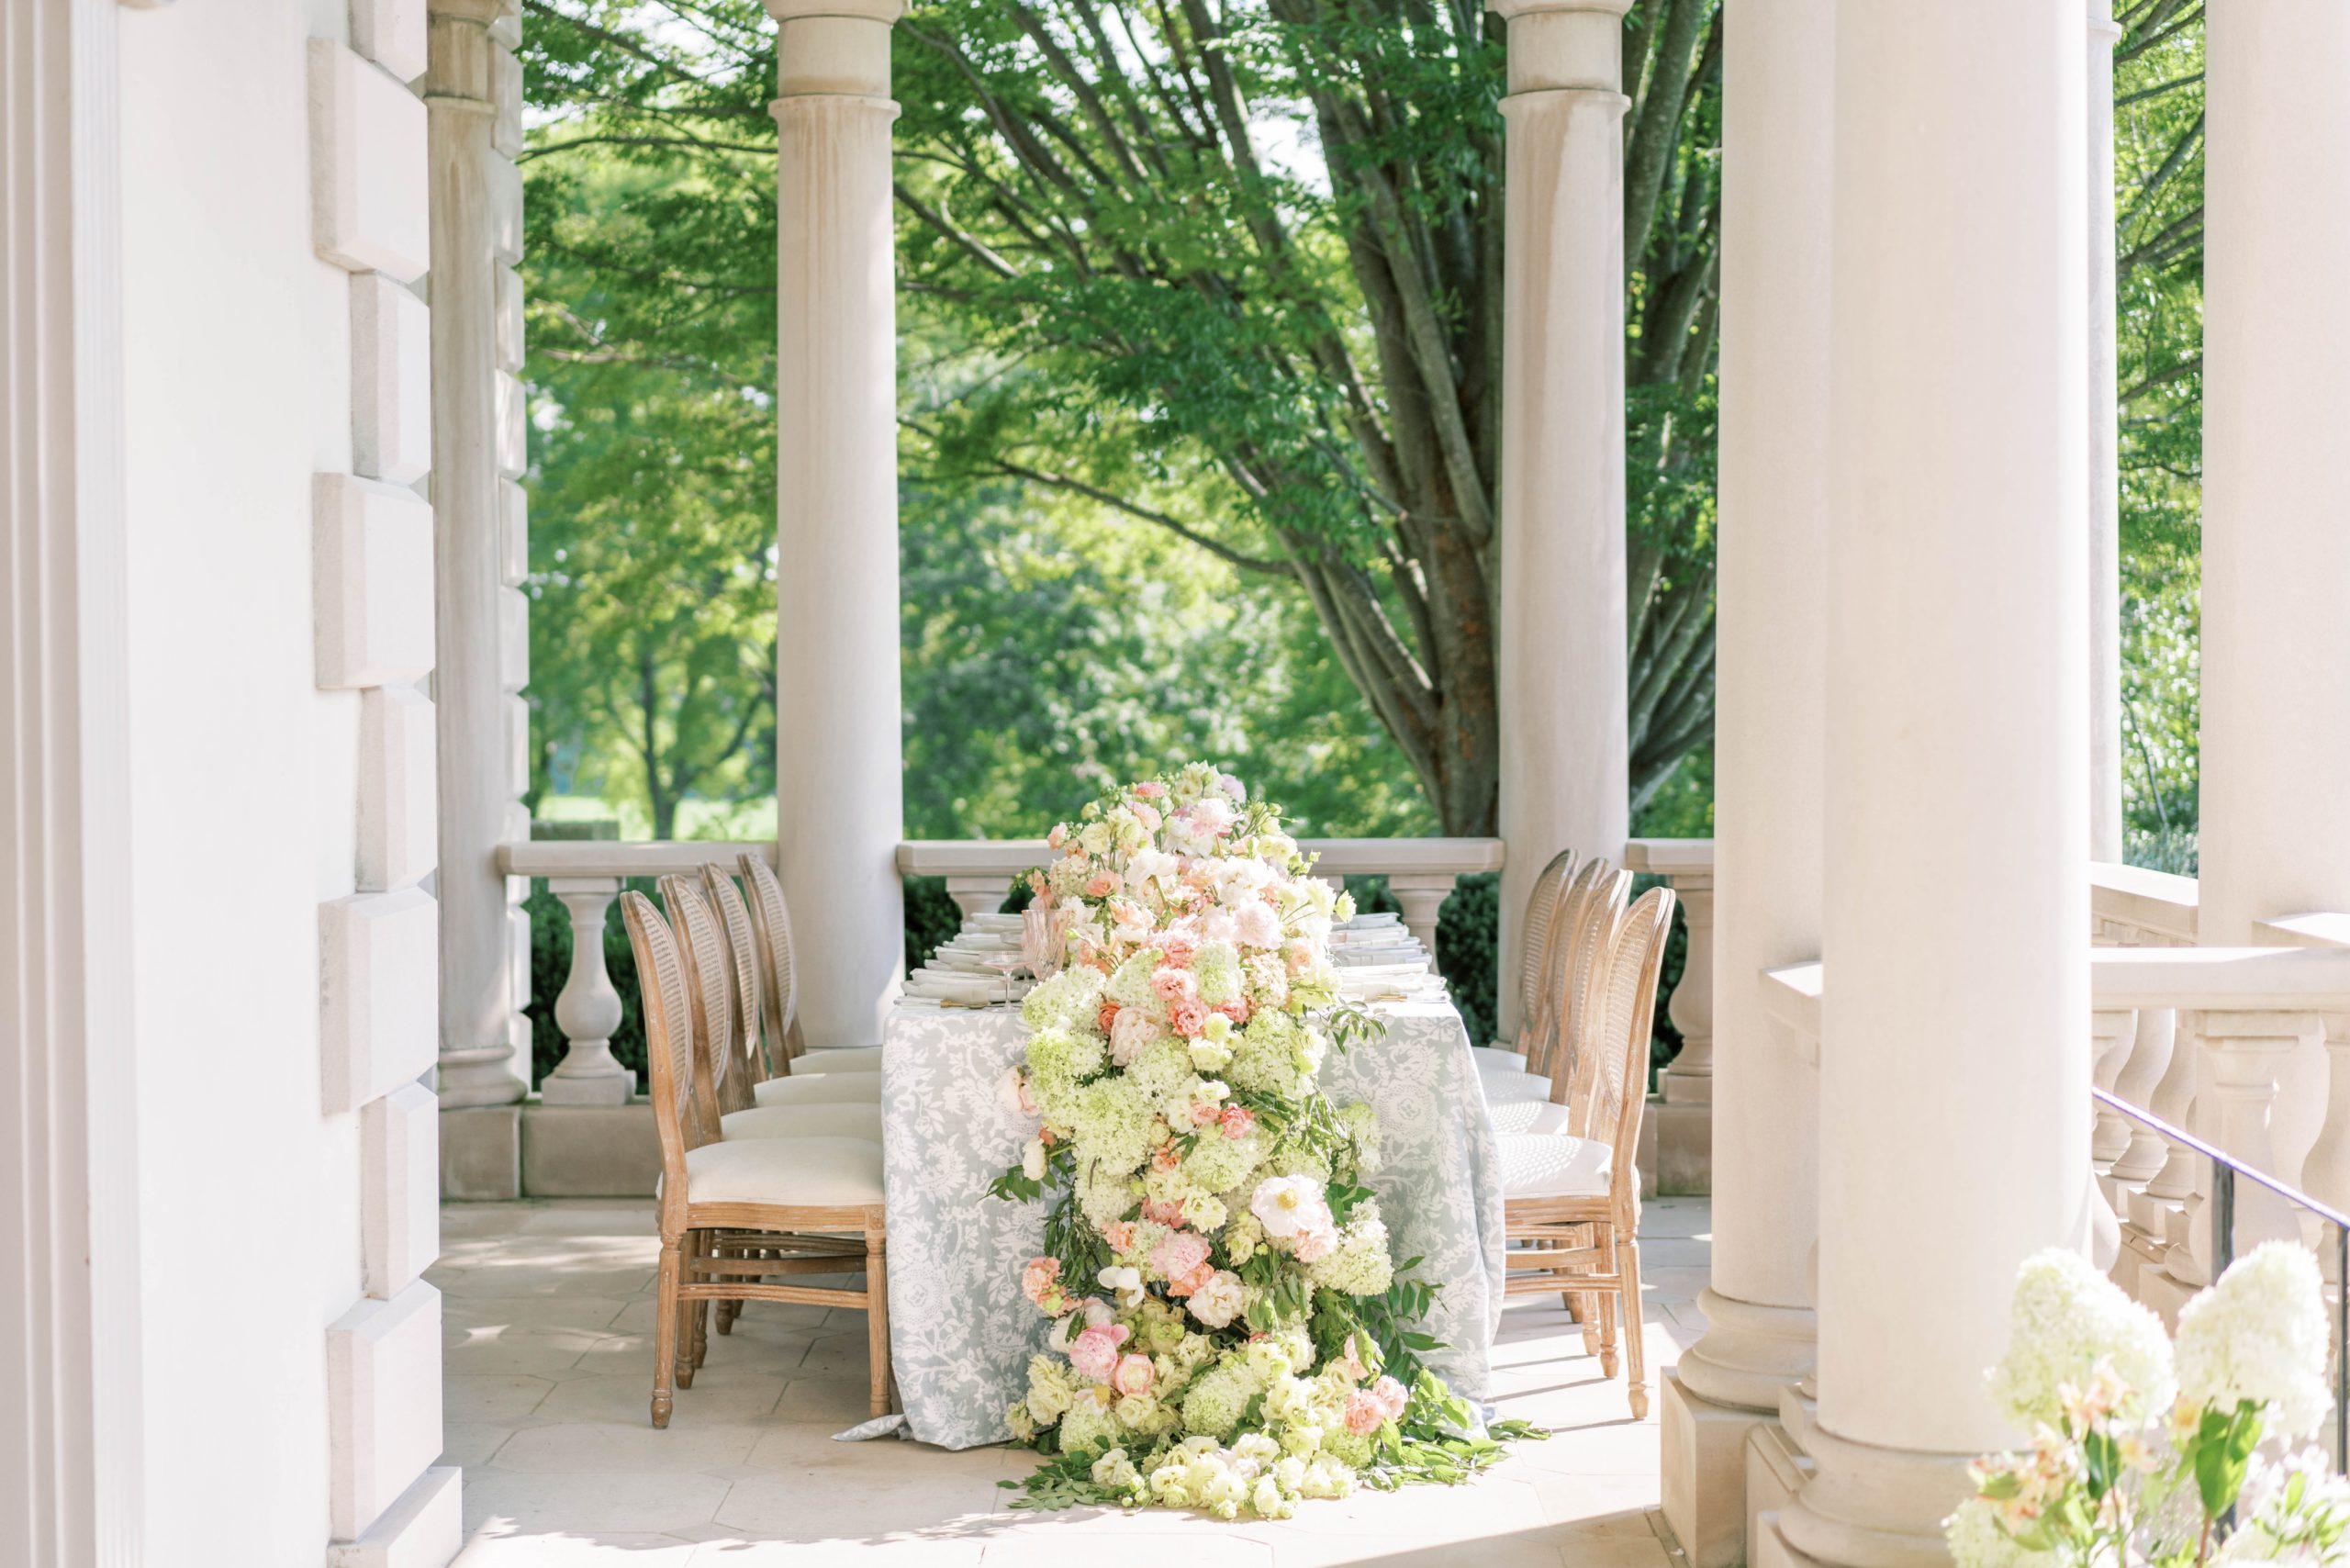 An elegant and classic Great Marsh Estate wedding in Bealeton, VA featuring a vintage car.